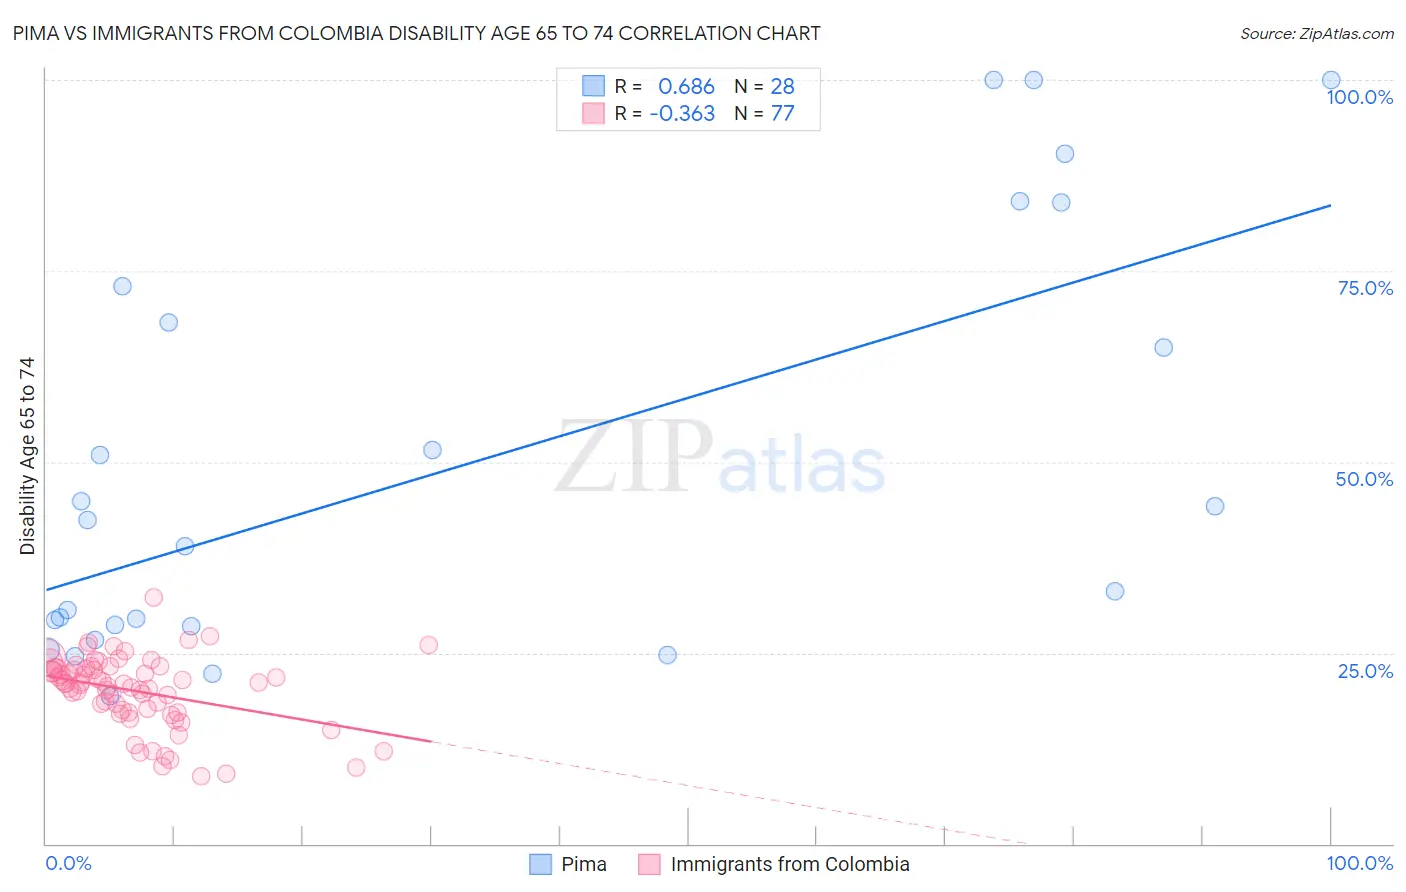 Pima vs Immigrants from Colombia Disability Age 65 to 74